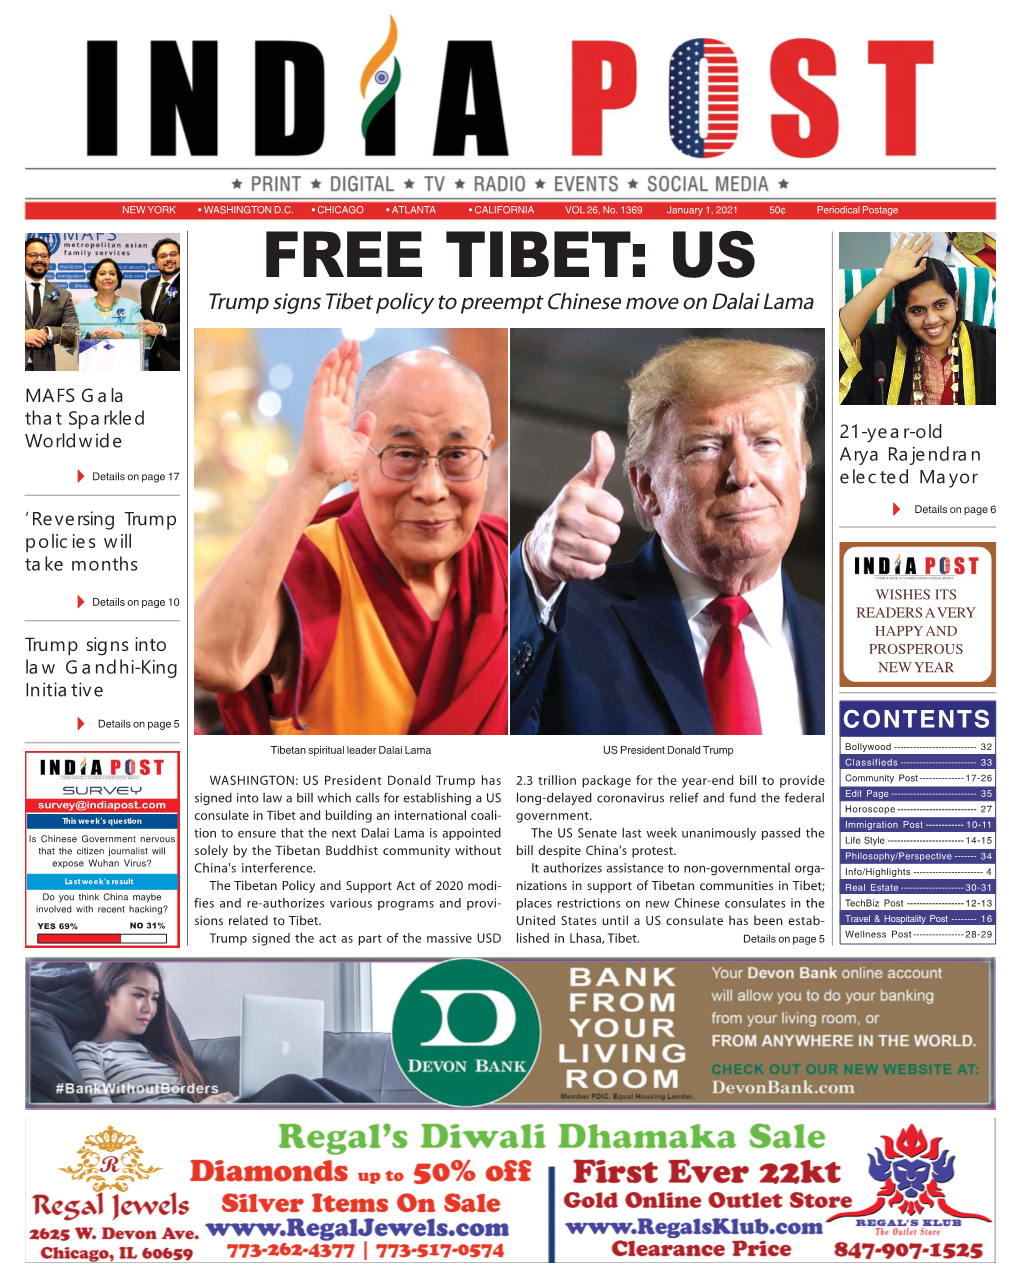 FREE TIBET: US Trump Signs Tibet Policy to Preempt Chinese Move on Dalai Lama